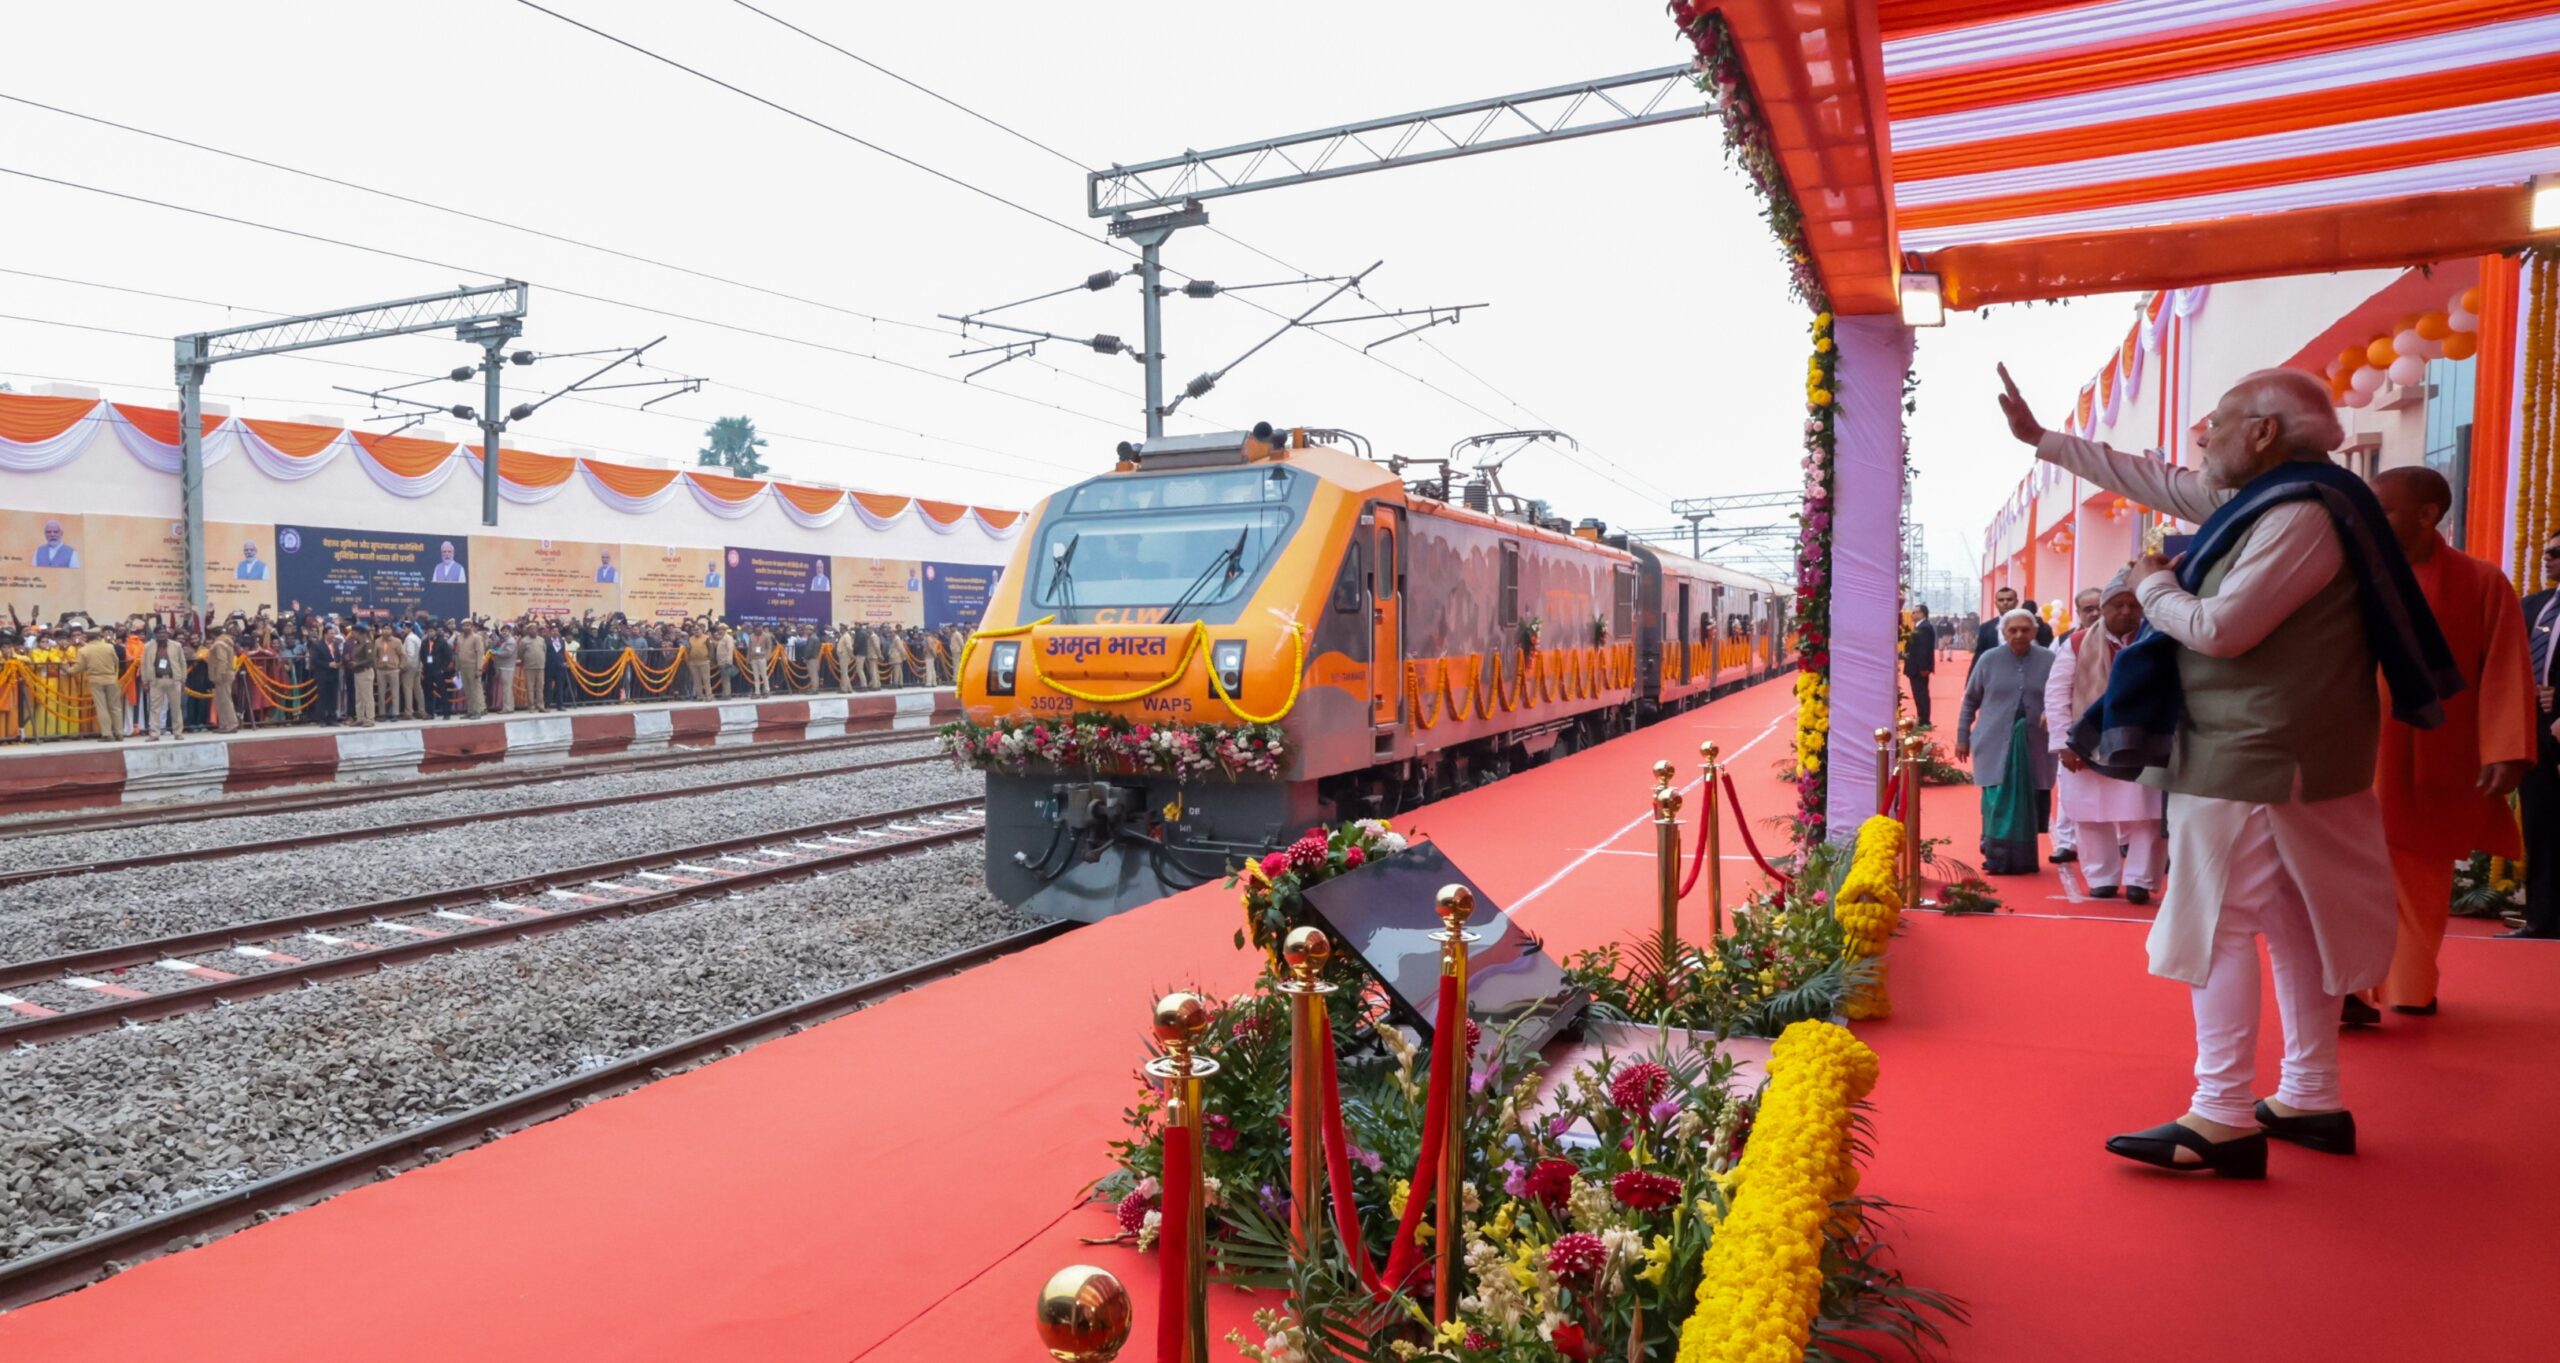 Prime Minister Narendra Modi today inaugurated the Maharishi Valmiki International Airport Ayodhya Dham, redeveloped Ayodhya Dham Railway Station and flagged off 2 new Amrit Bharat trains and 6 new Vande Bharat Trains.